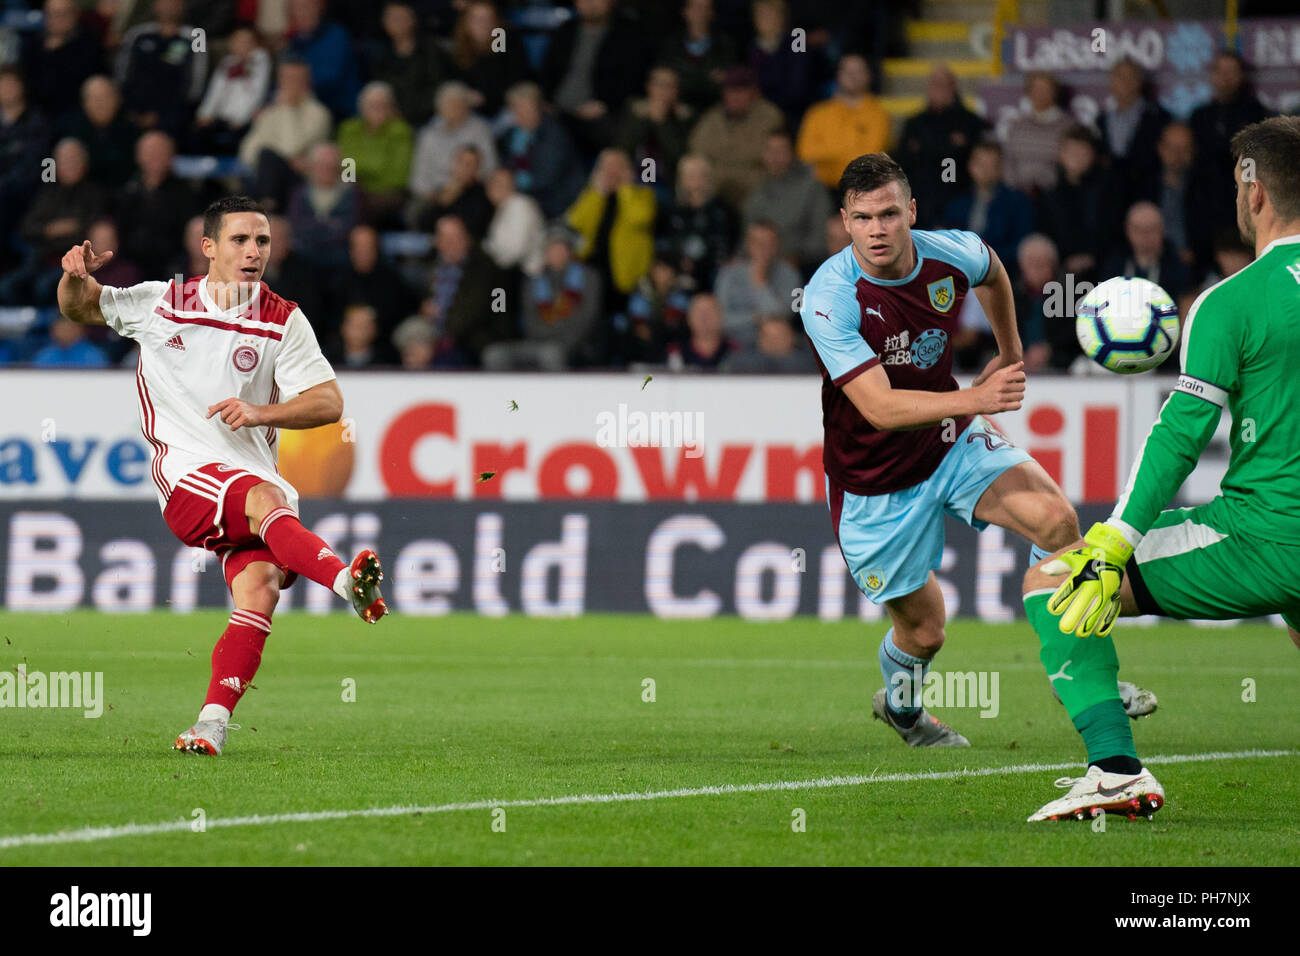 Burnley, UK. 30th August 2018. Olympiacos's Daniel Podence scores his sides first goal    30th August 2018, Turf Moor, Burnley, England; UEFA Europa League, Play off leg 2 of 2, Burnley v Olympiacos FC Credit: Terry Donnelly/Alamy Live News Stock Photo